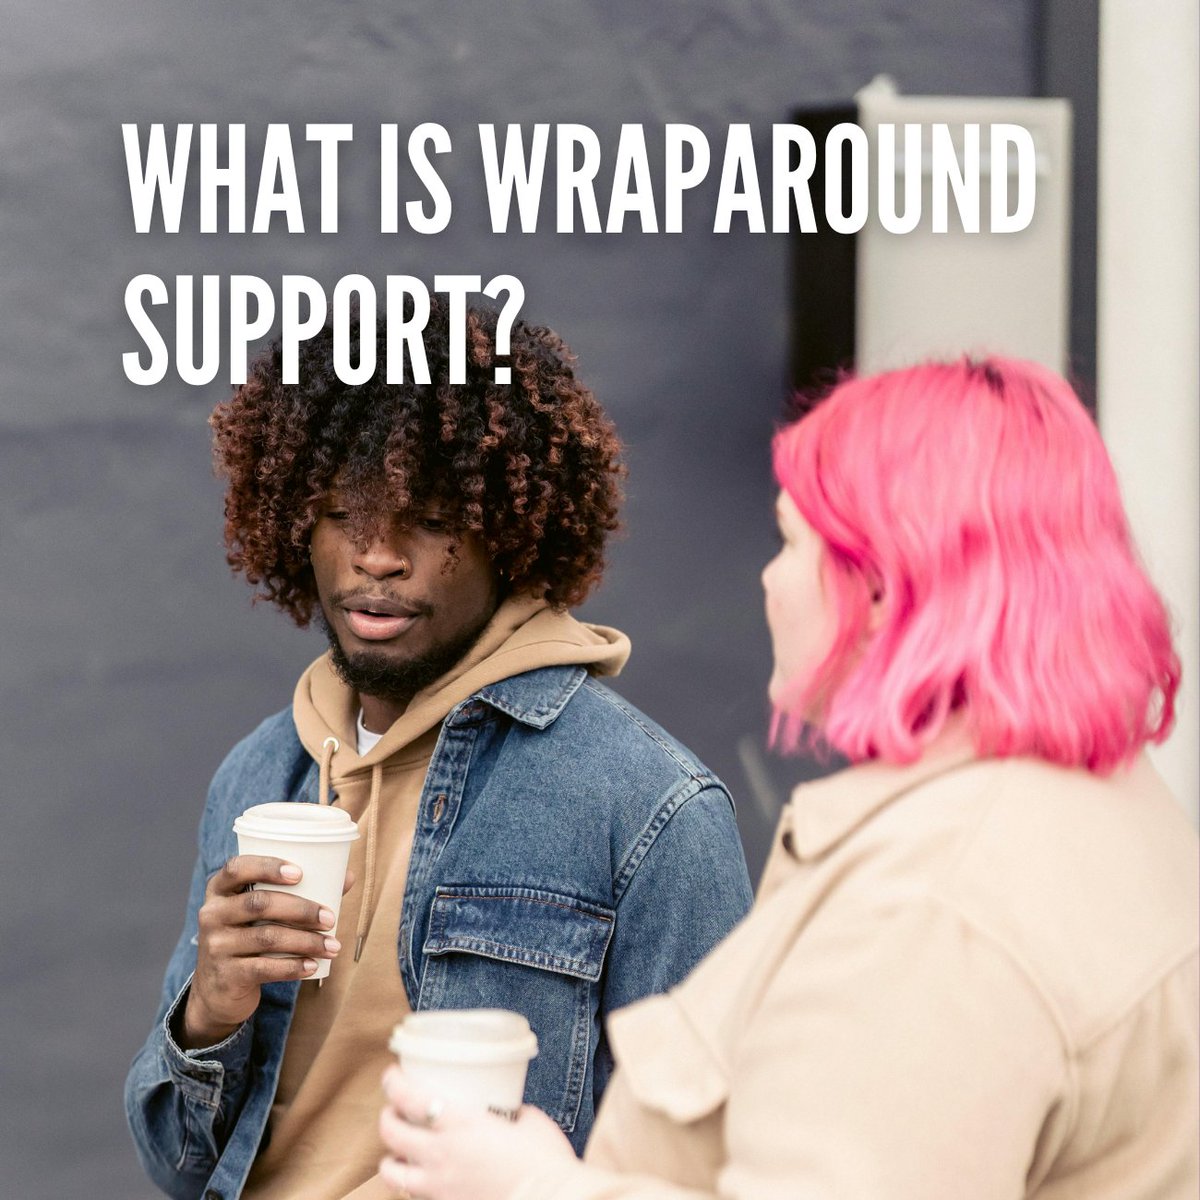 Homelessness is complex. So it needs complex solutions. The wraparound we offer is a unique kind of support that combines housing support with mental health care, substance abuse treatment and more. This support is tailored to each person's needs, so they get the right help.